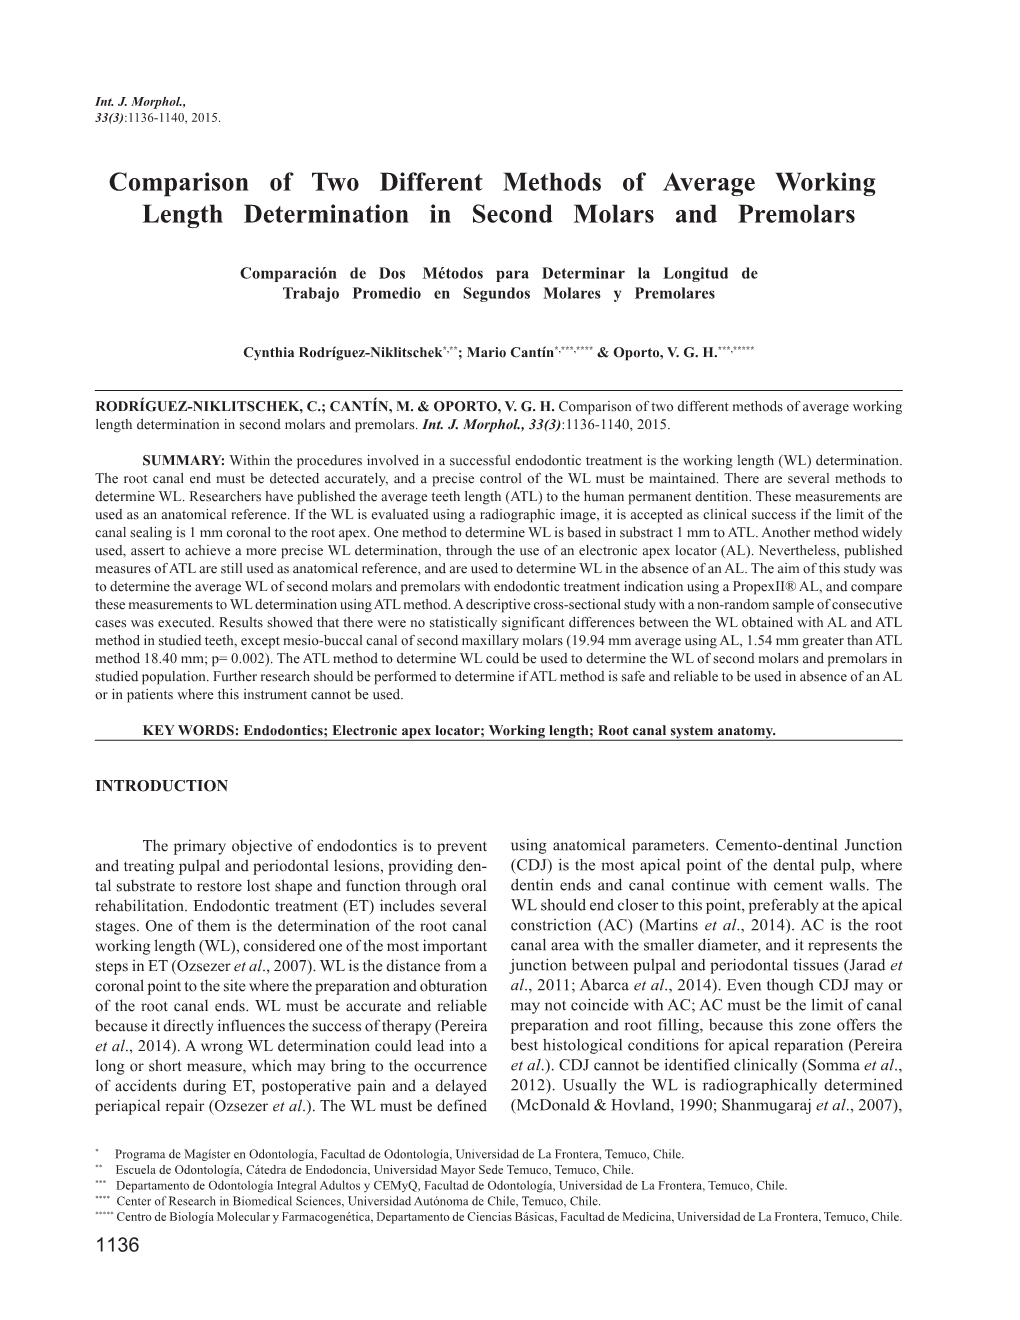 Comparison of Two Different Methods of Average Working Length Determination in Second Molars and Premolars